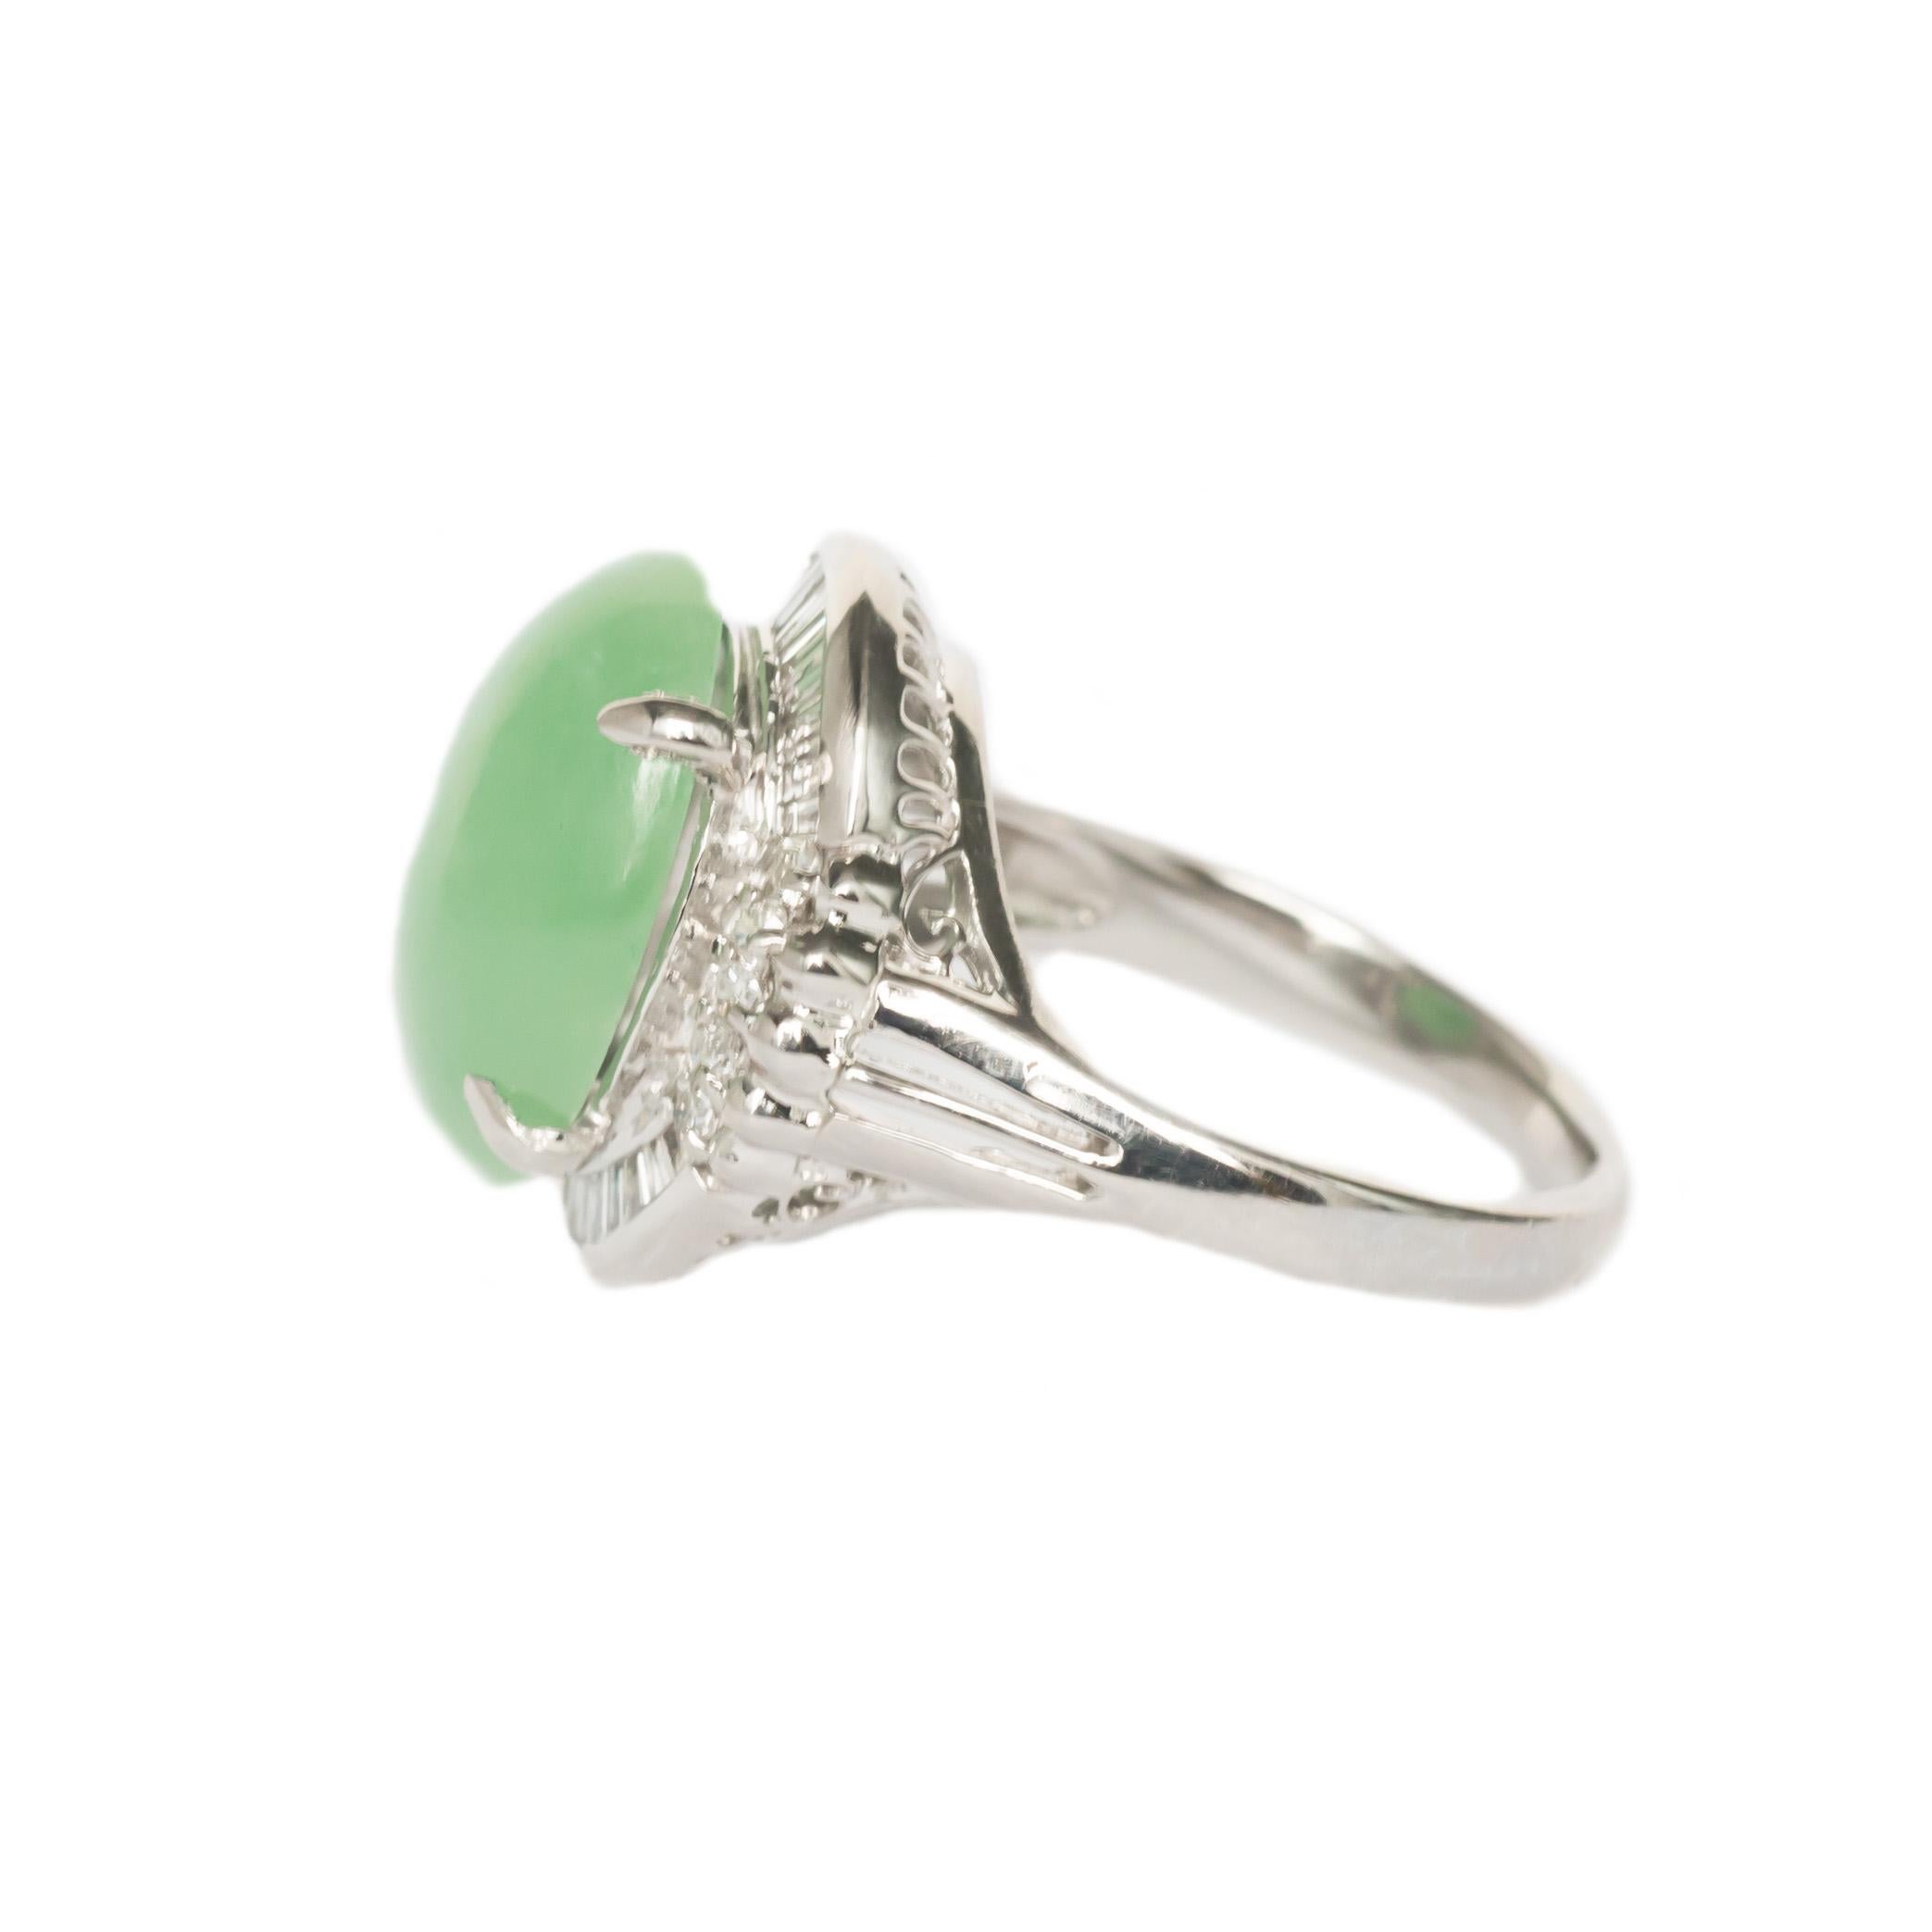 
Item Details: 
Ring Size: 4.90
Metal Type: Platinum
Weight: 7.4 grams

Center Diamond Details
Shape: Oval Cabochon
Carat Weight: 4.00 Carat
Color: Light green-medium green color
Clarity: VS Clarity

Side Stone Details: 
Shape: Round and